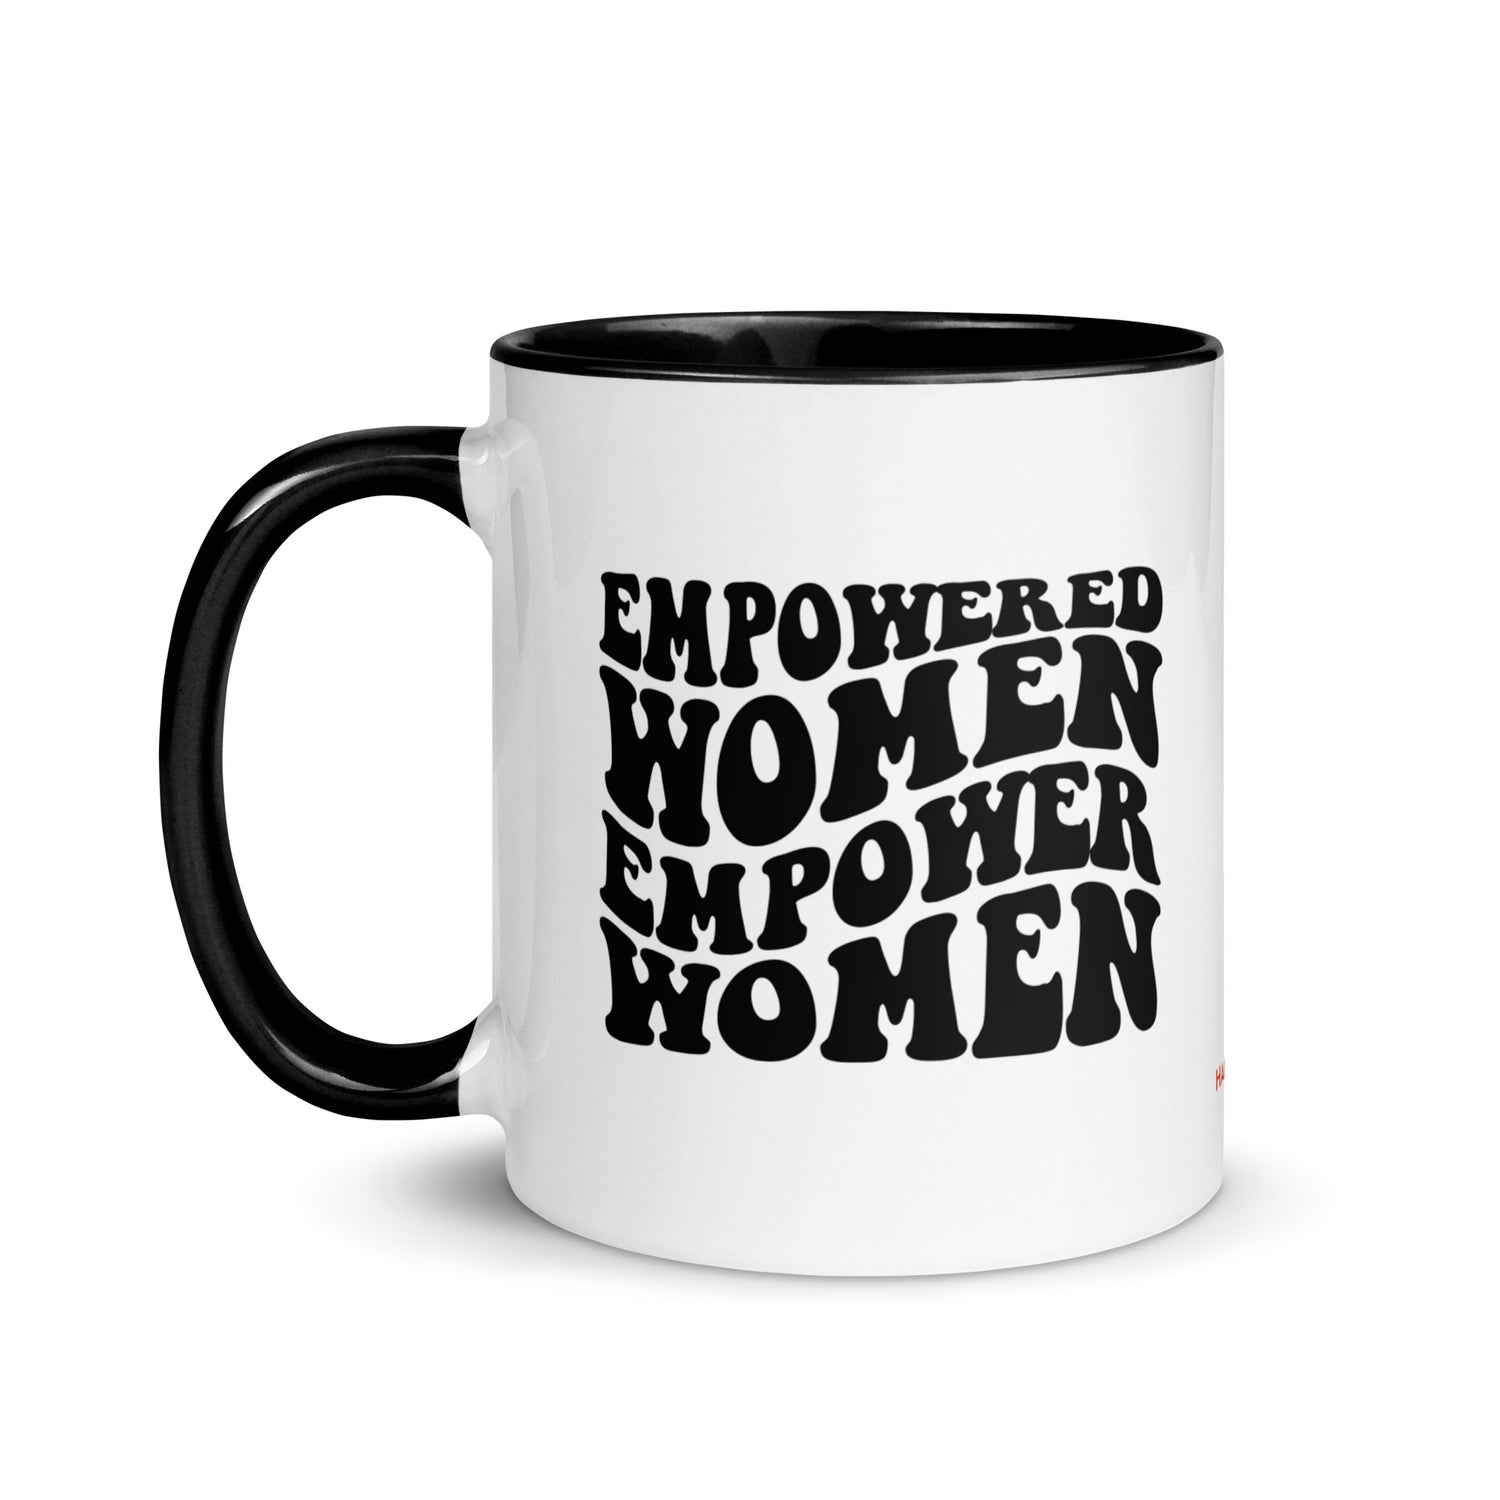 Empowered Women - Mug with Color Inside